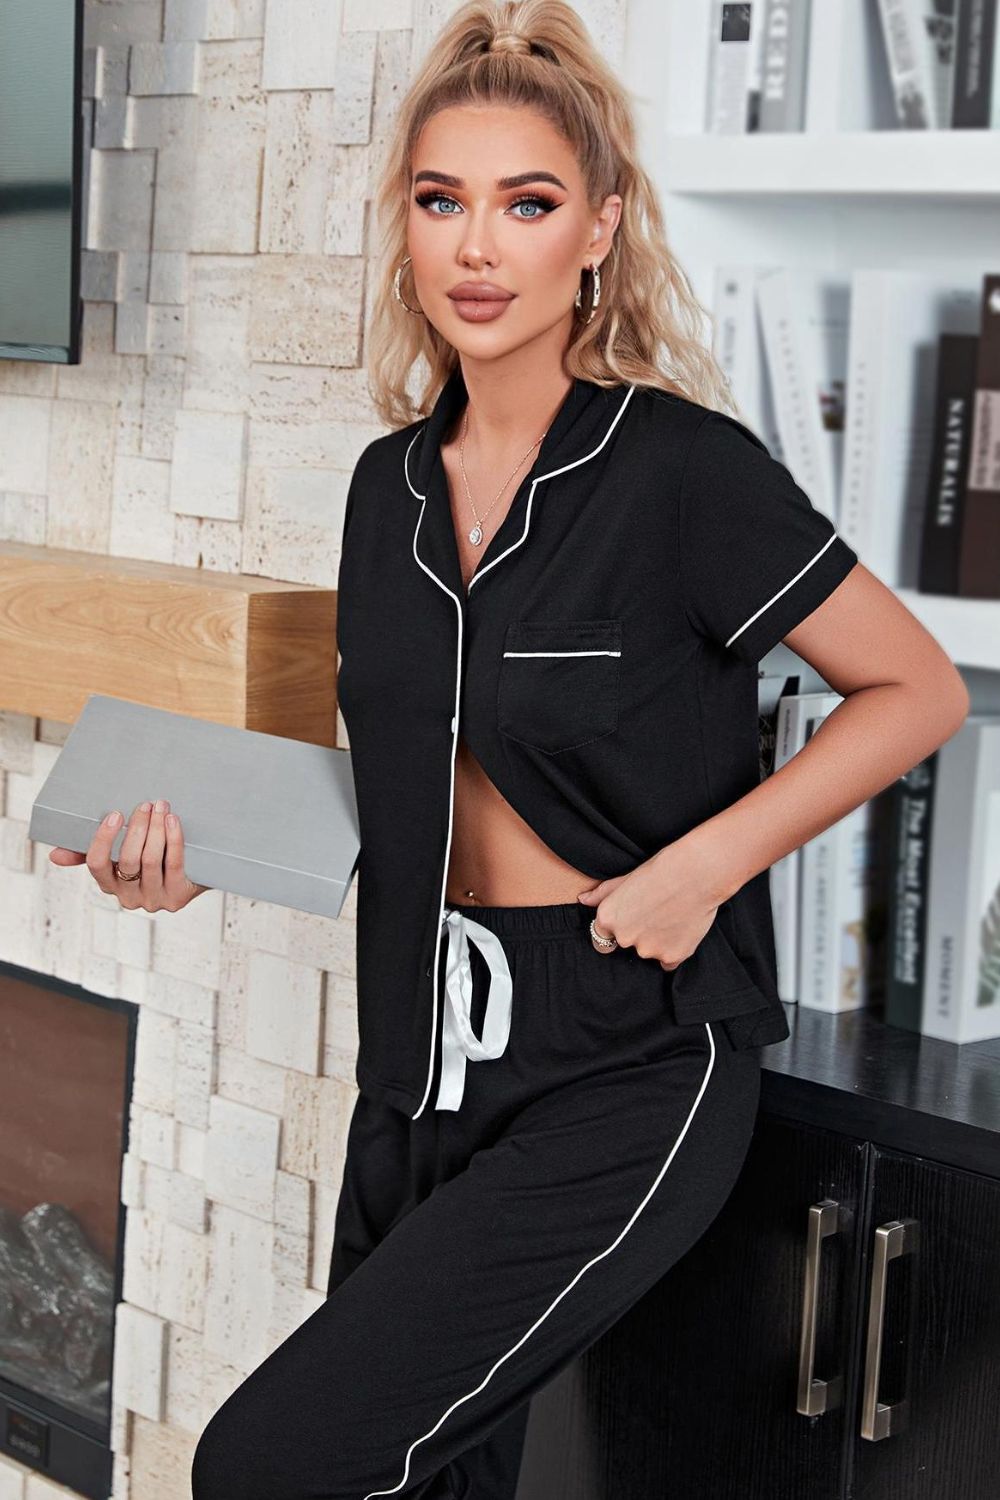 Contrast Piping Short Sleeve Top and Pants Pajama Set - DromedarShop.com Online Boutique